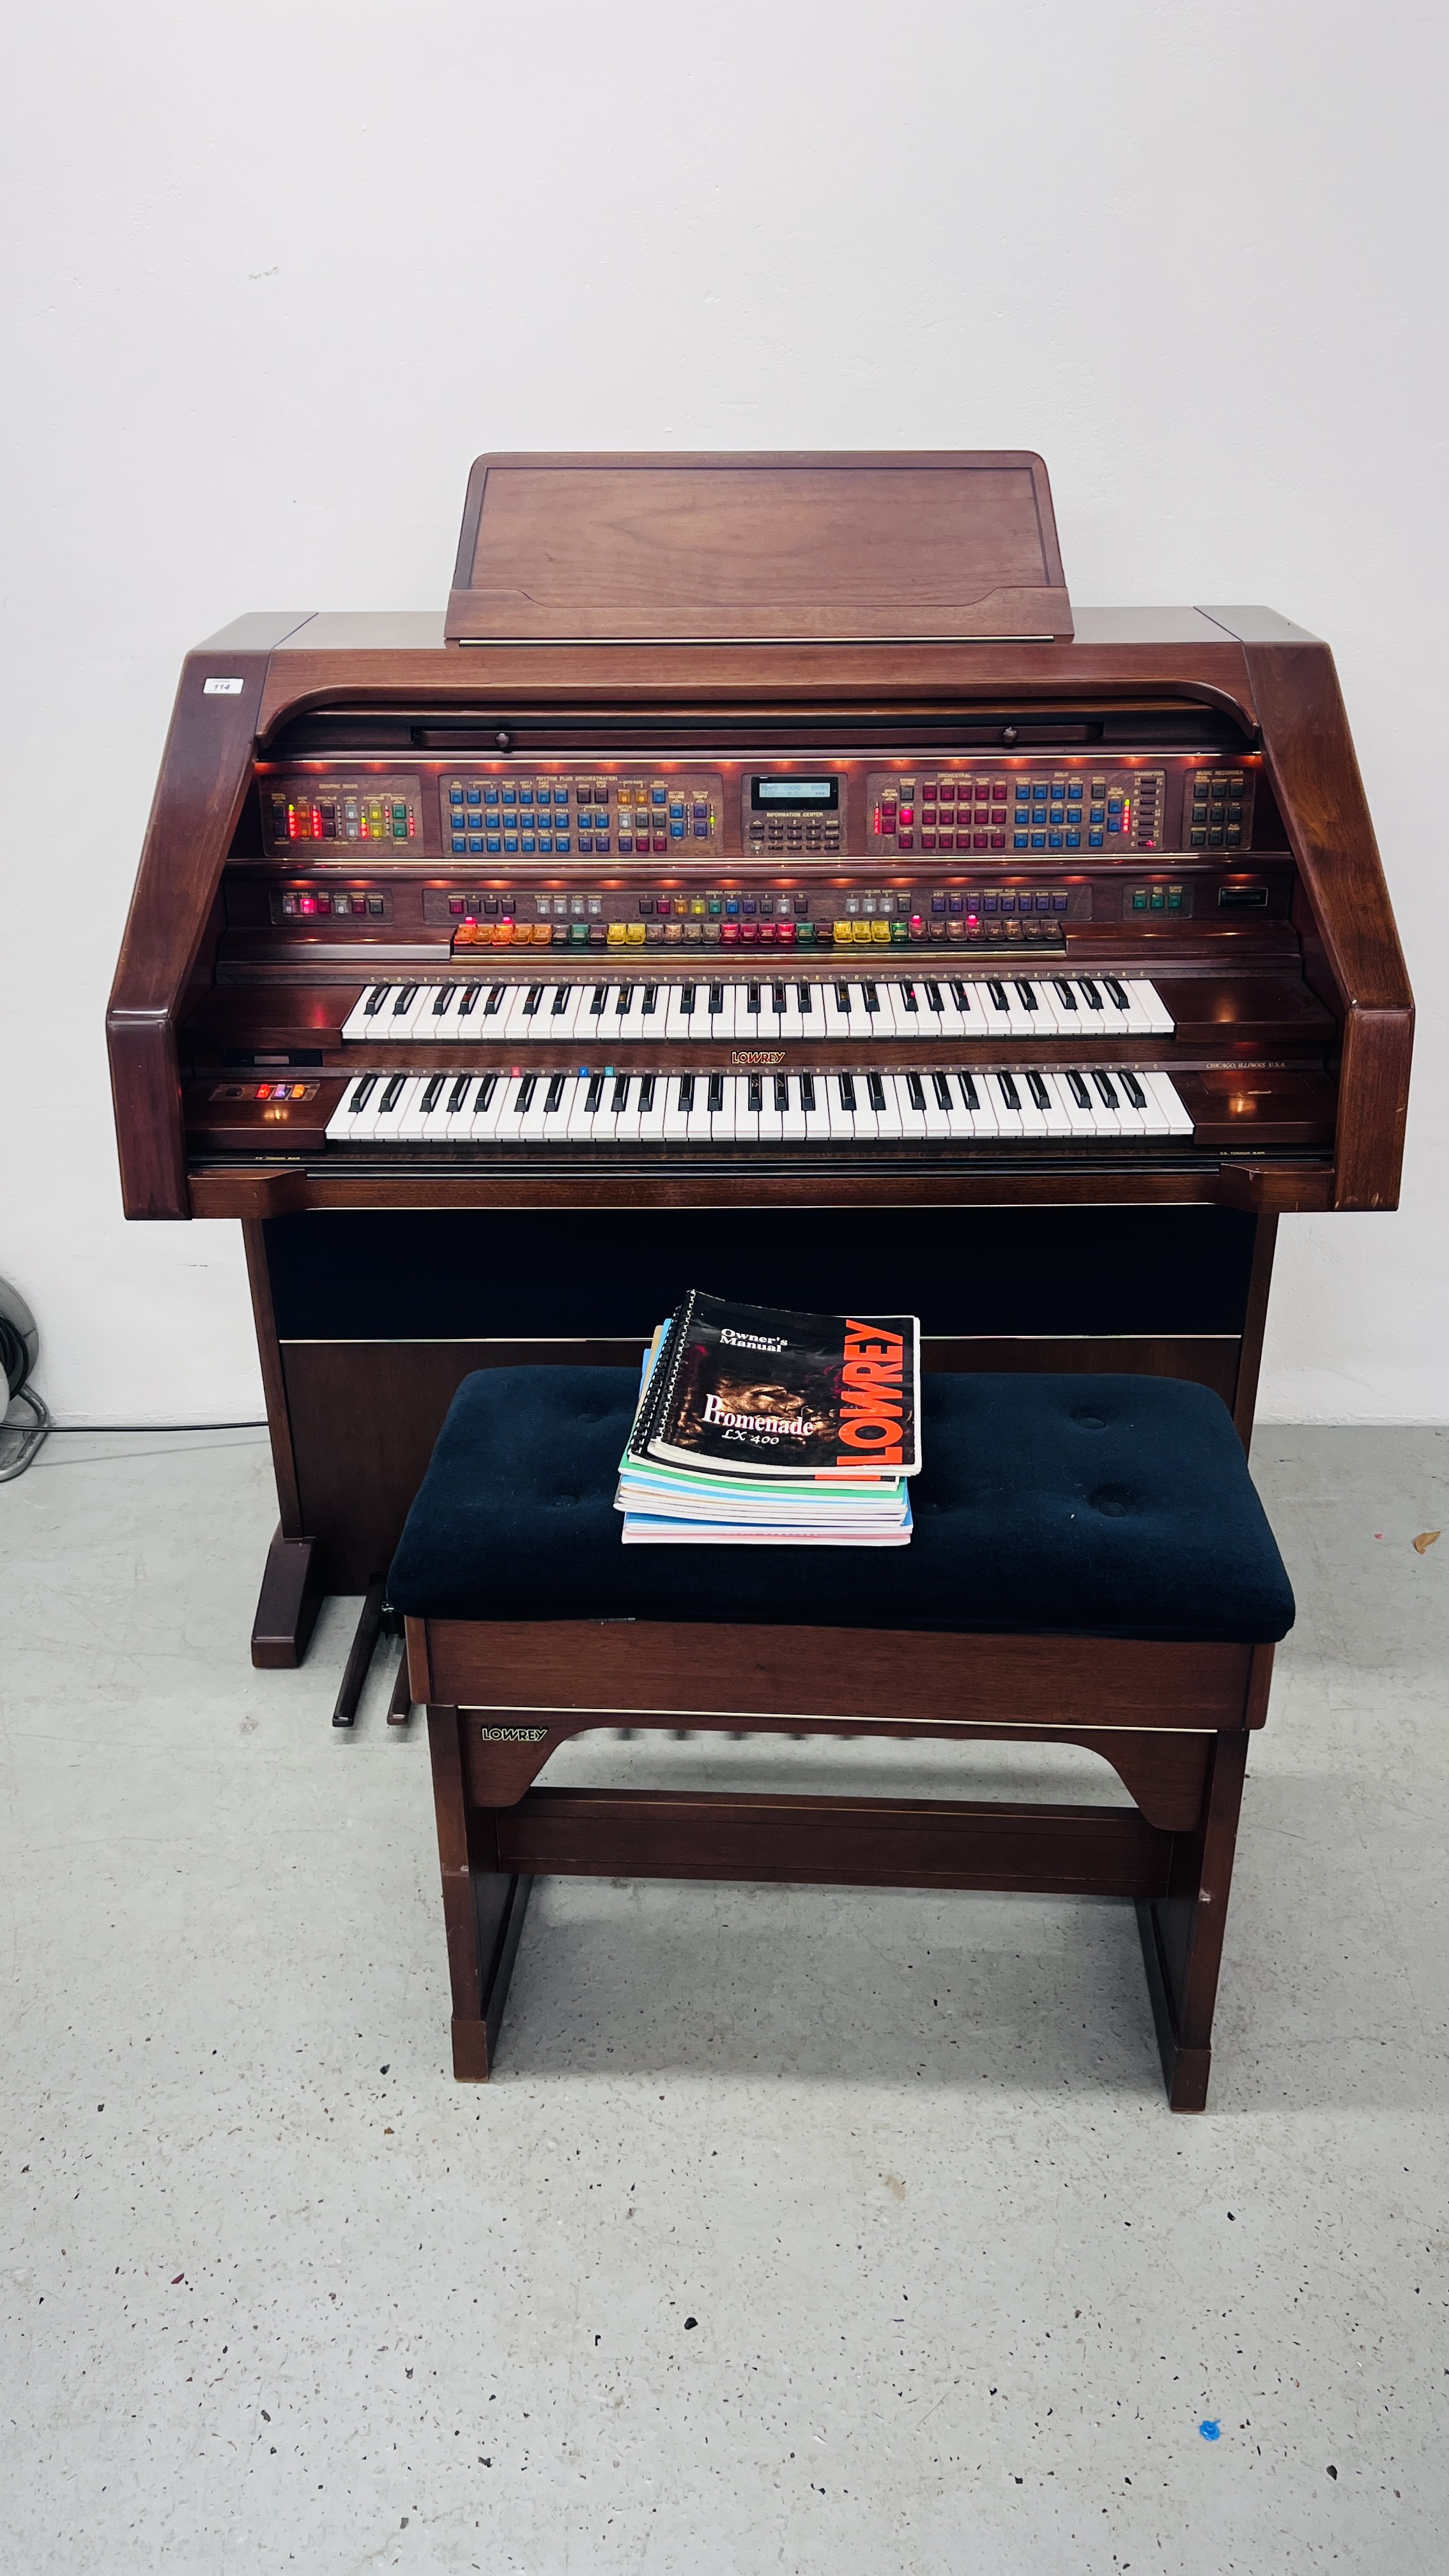 A LOWREY PROMENADE LX400 ELECTRIC ORGAN COMPLETE WITH LOWREY STOOL,